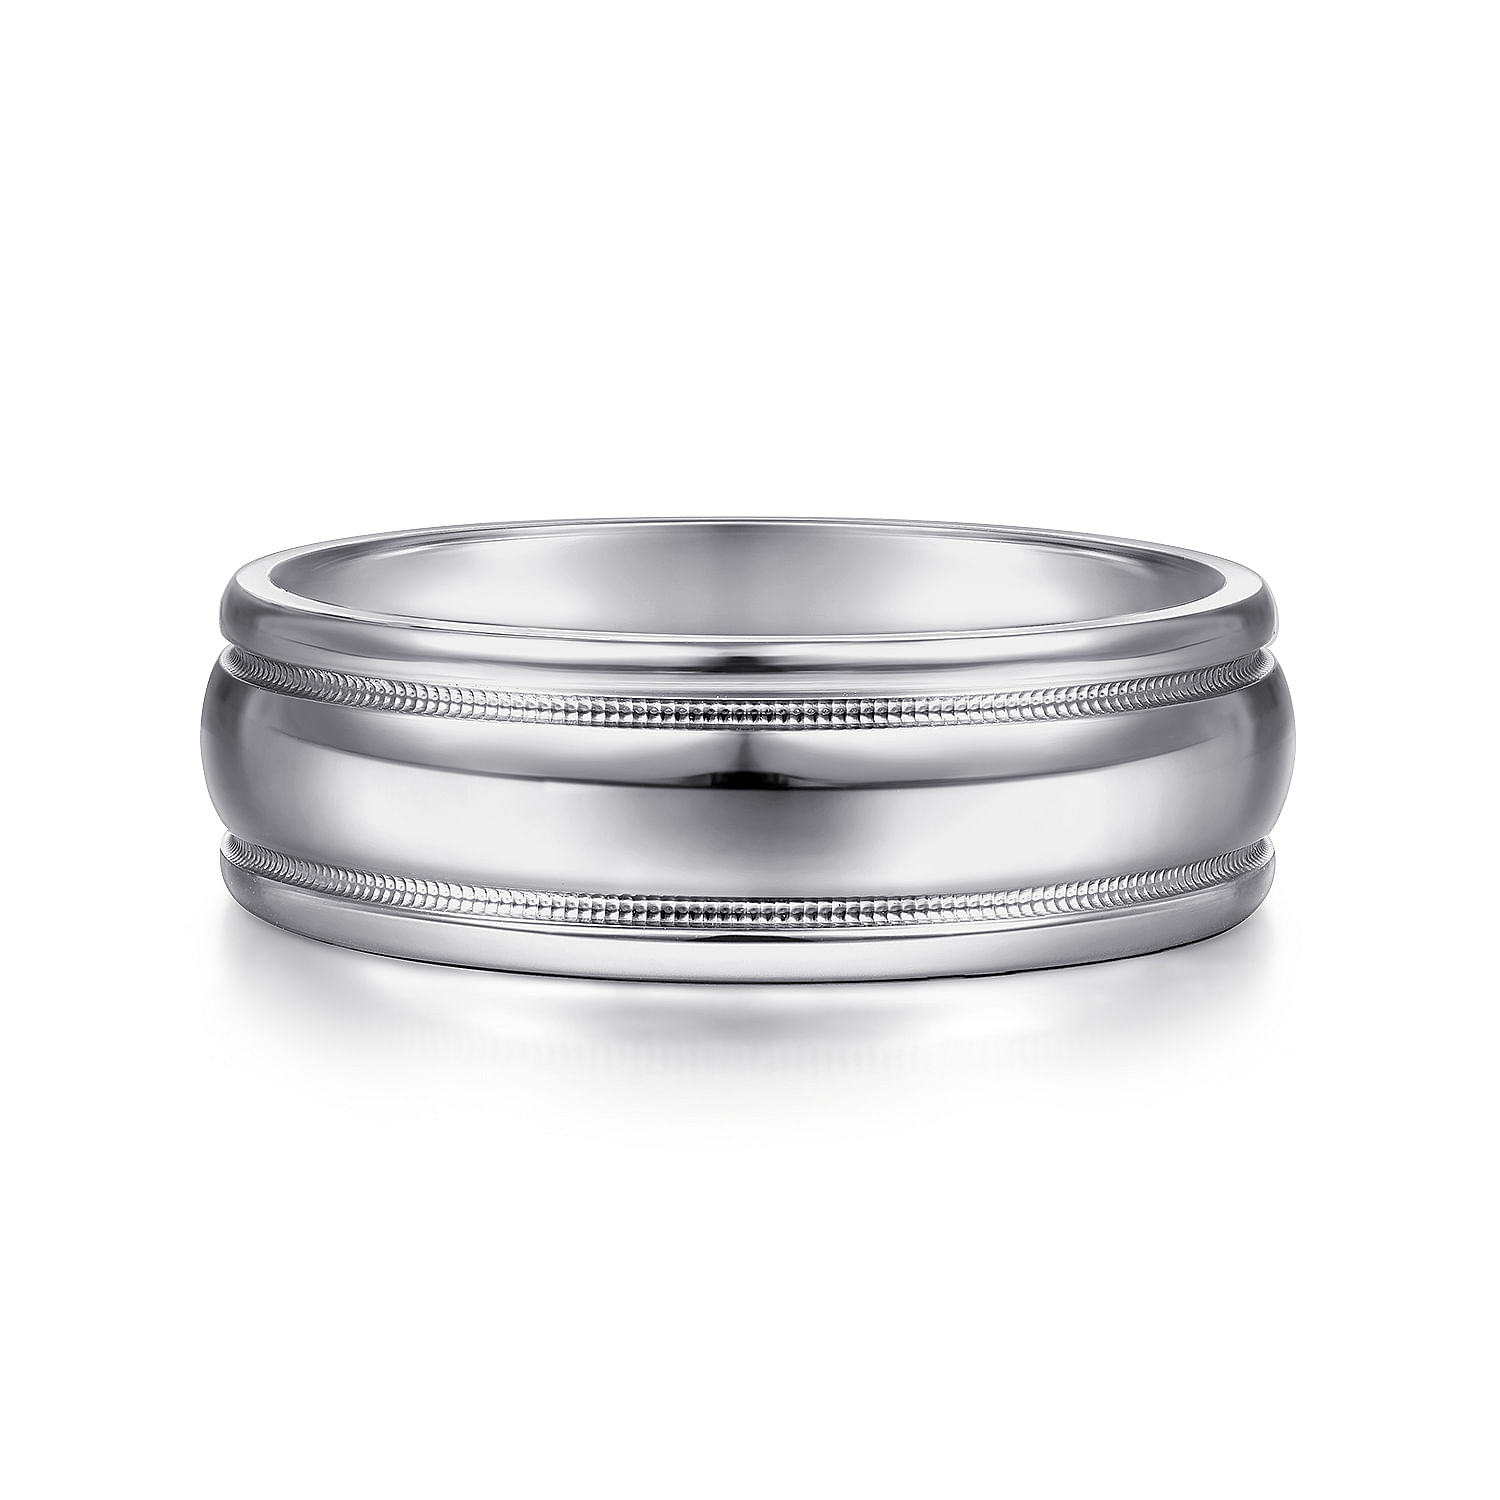 William---14K-White-Gold-7mm---Men's-Wedding-Band-in-High-Polished-Finish1